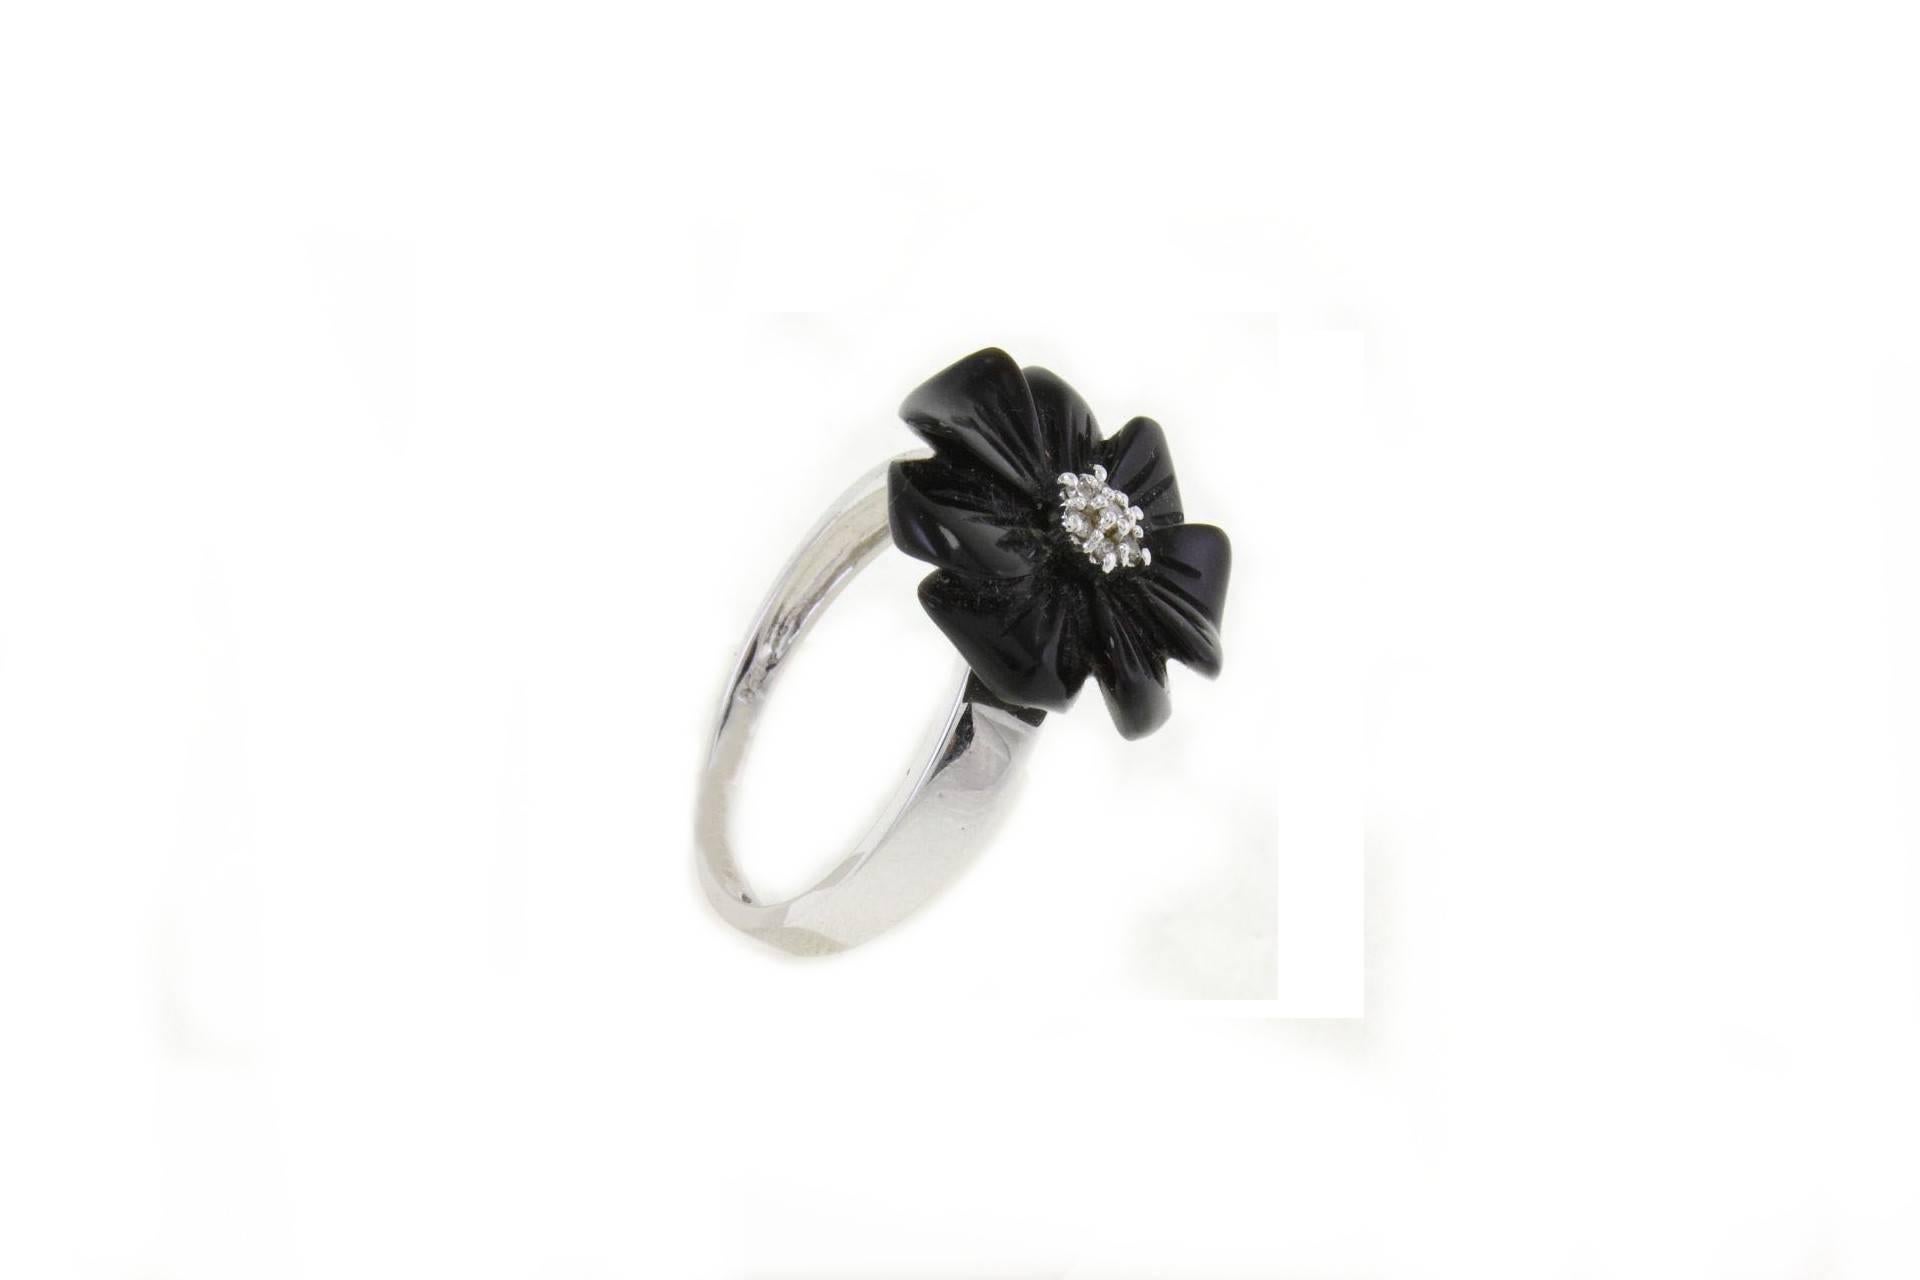 Fashion ring in 18kt white gold composed of a flower shaped onyx and central diamonds.
Diamonds 0.05 kt
Onyx 1.10 gr
Tot.Weight 3.90 gr
R.F rau
For any enquires, please contact the seller through the message center.
